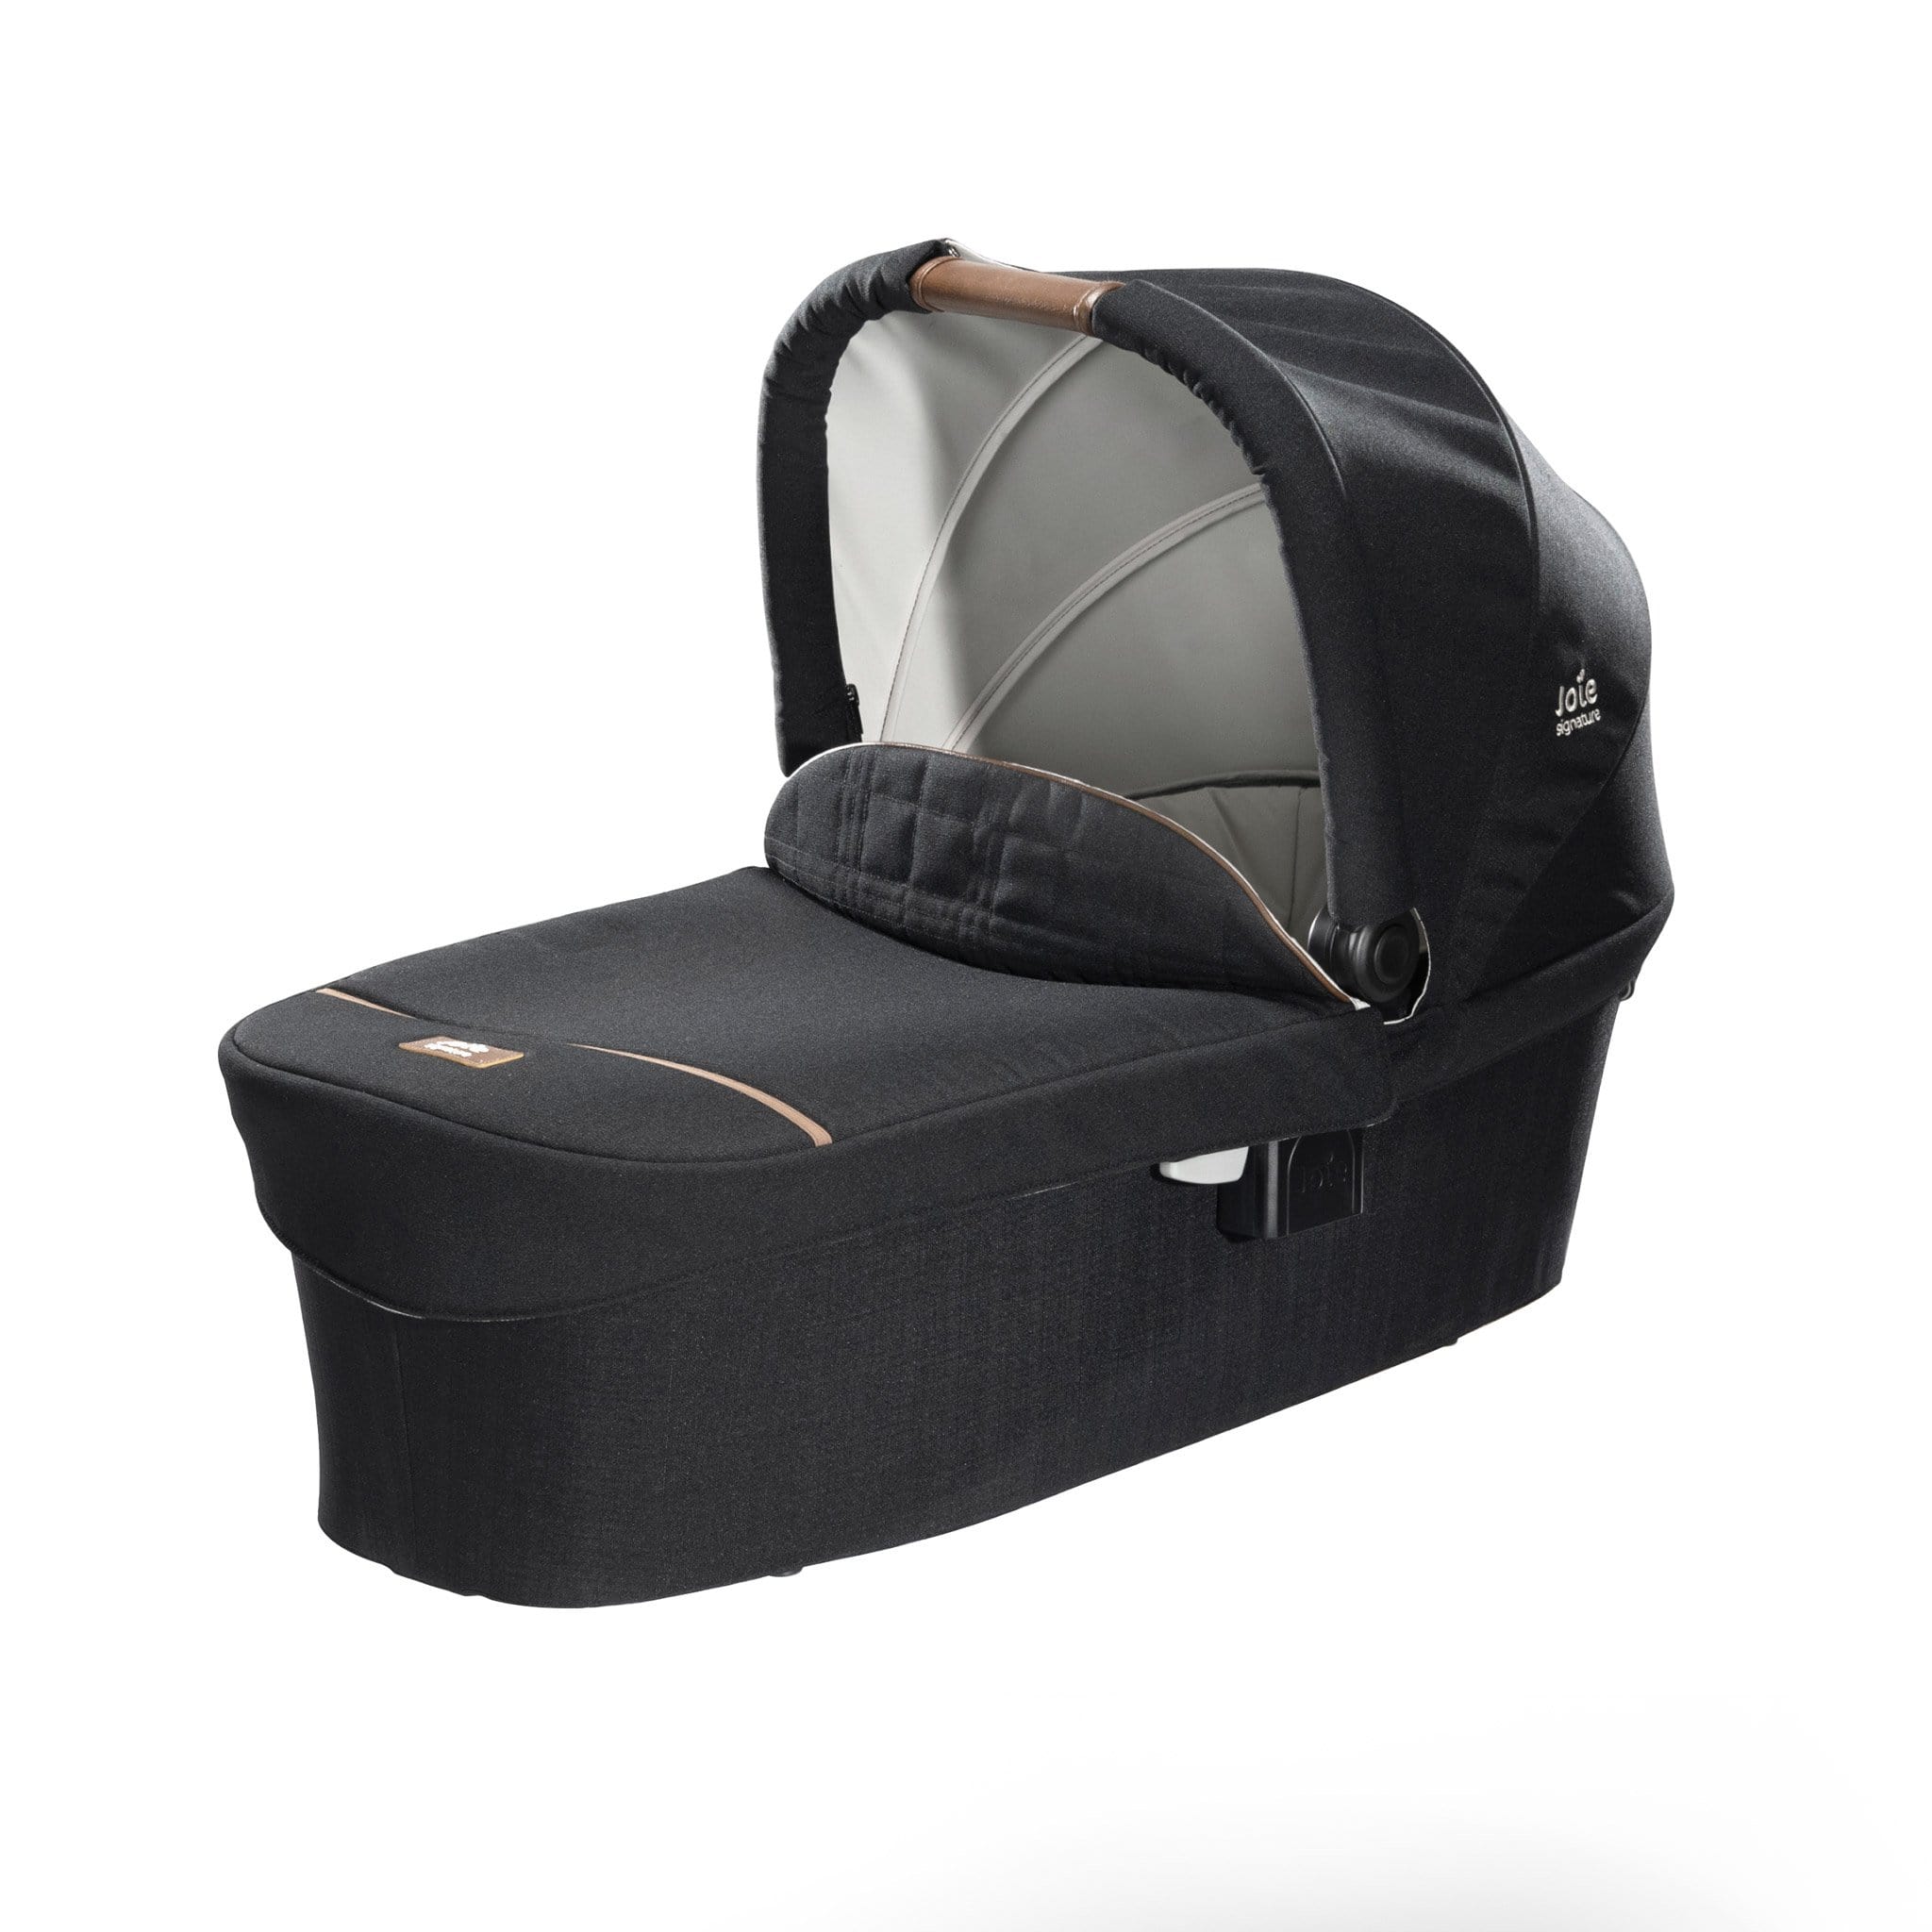 Joie Chassis & Carrycots Joie Ramble Signature Carrycot Eclipse A1112PBECL000